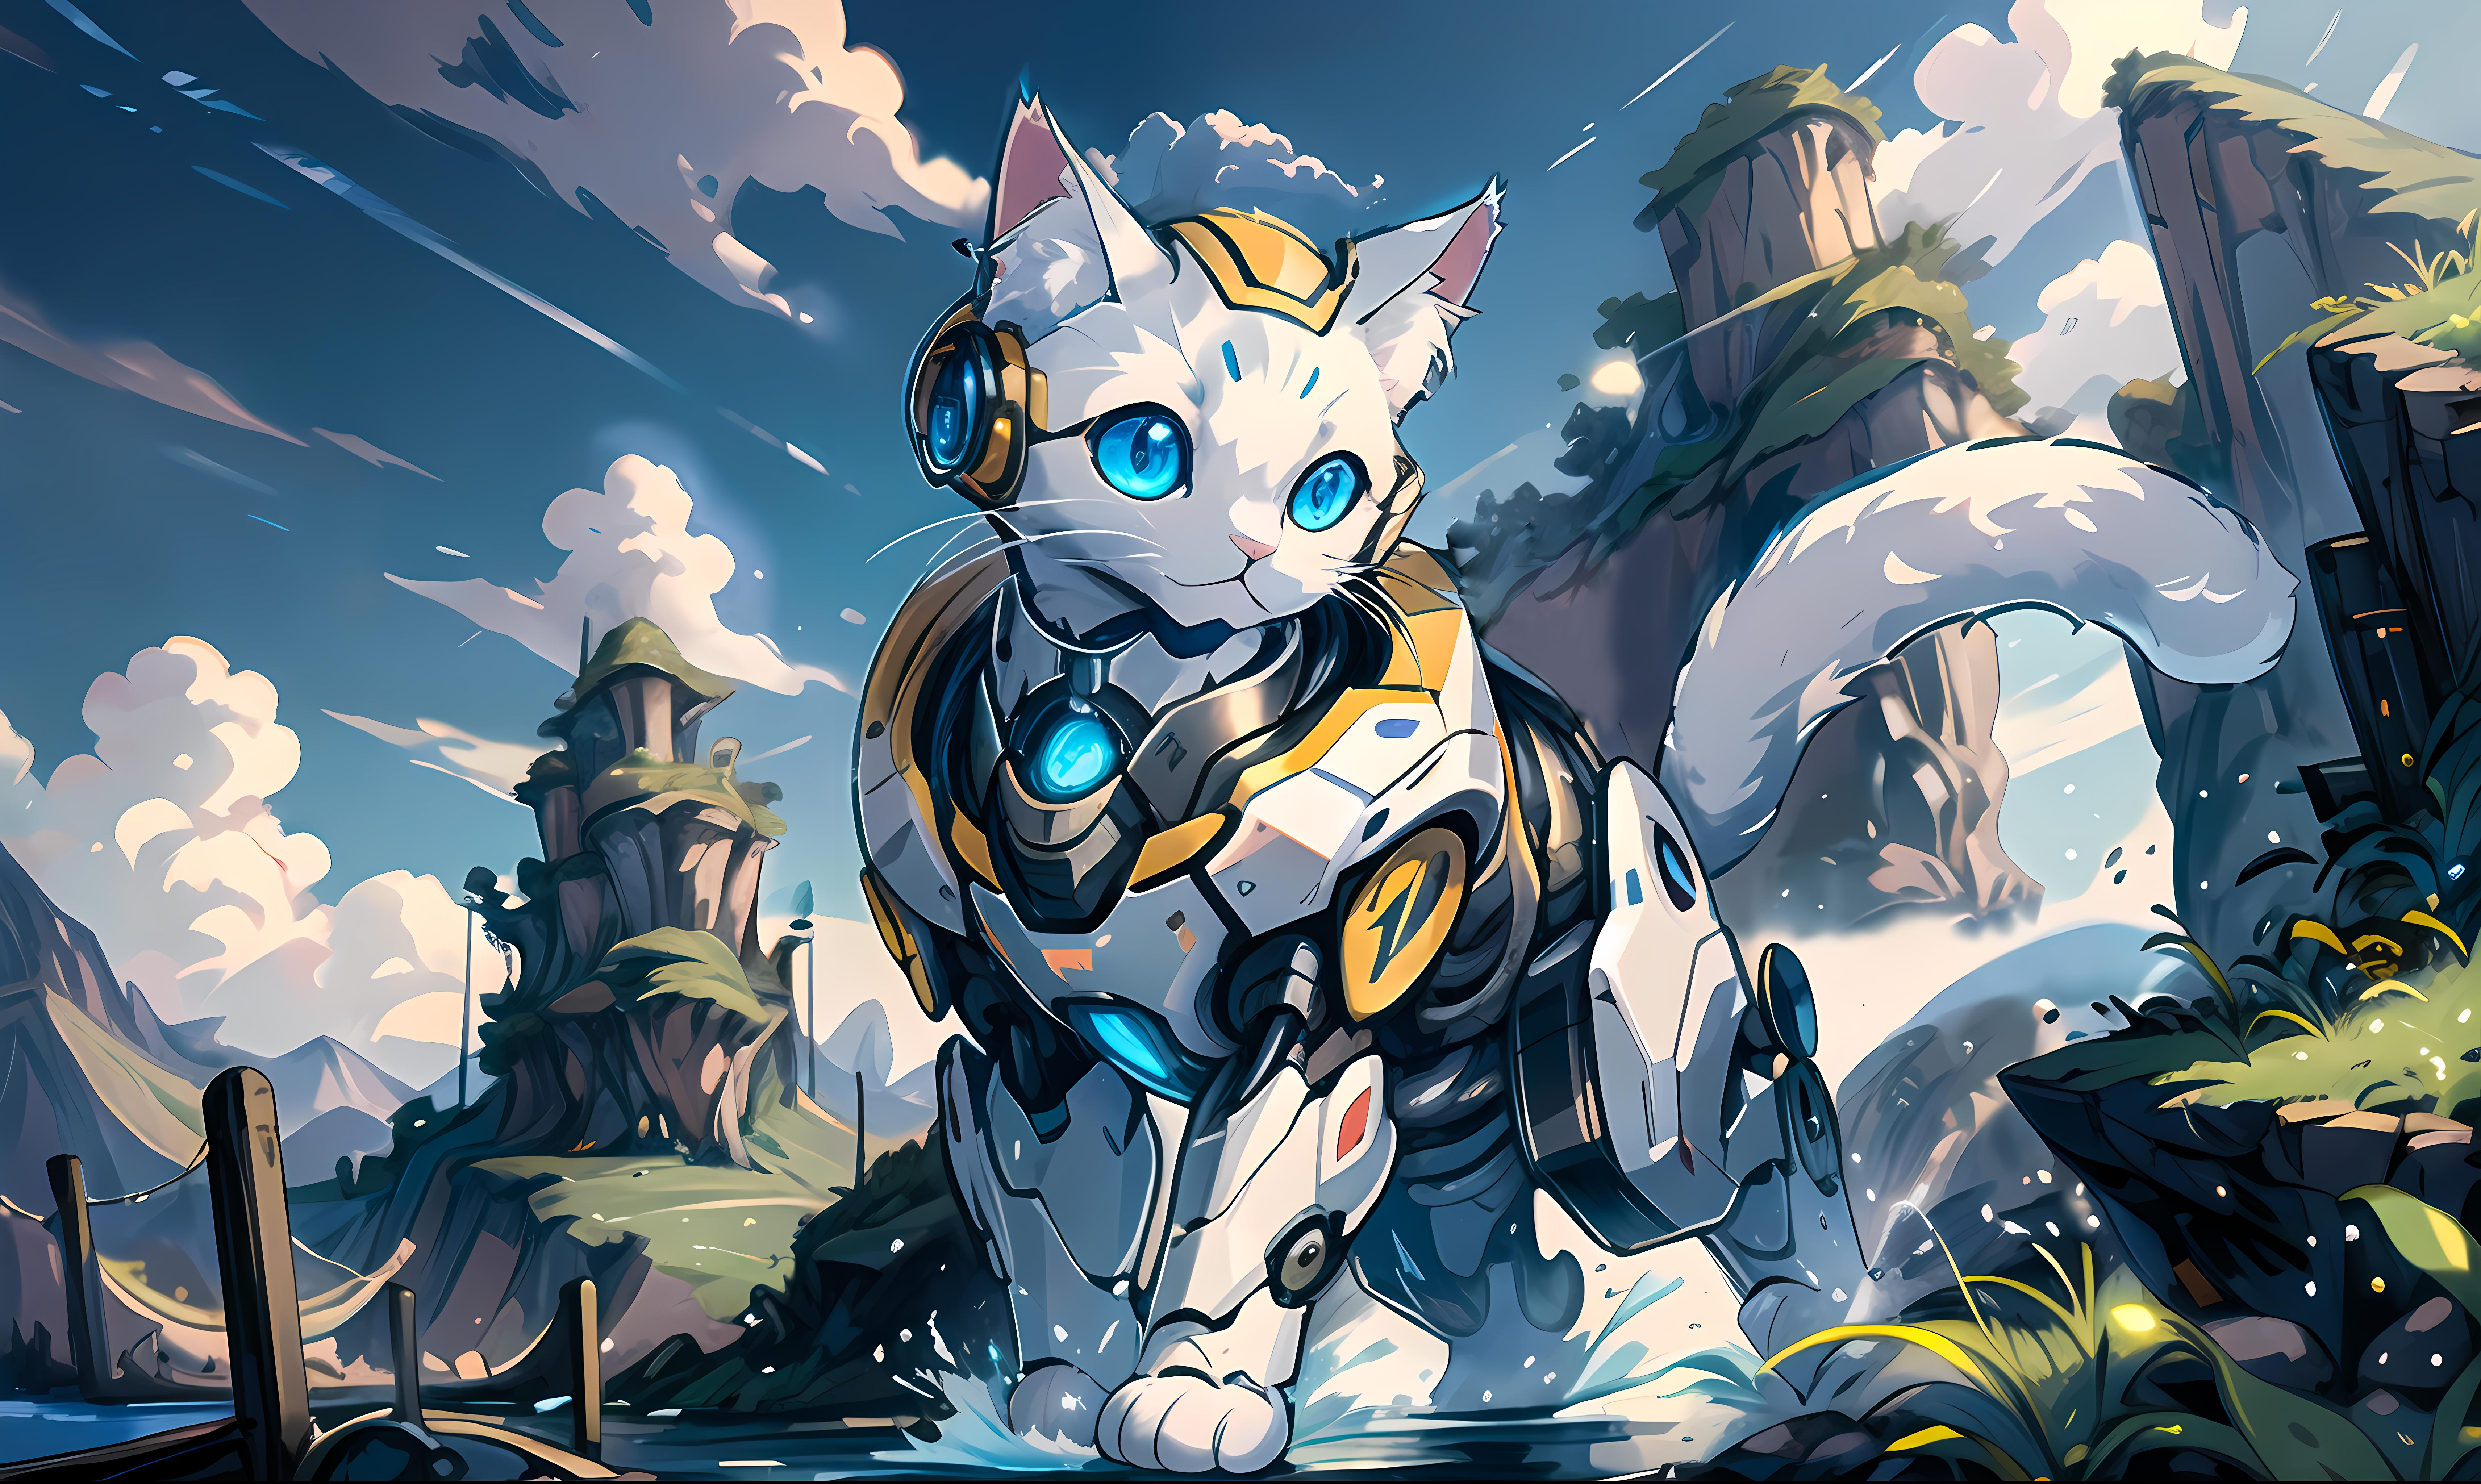 Scifi Cat image by laonnibile